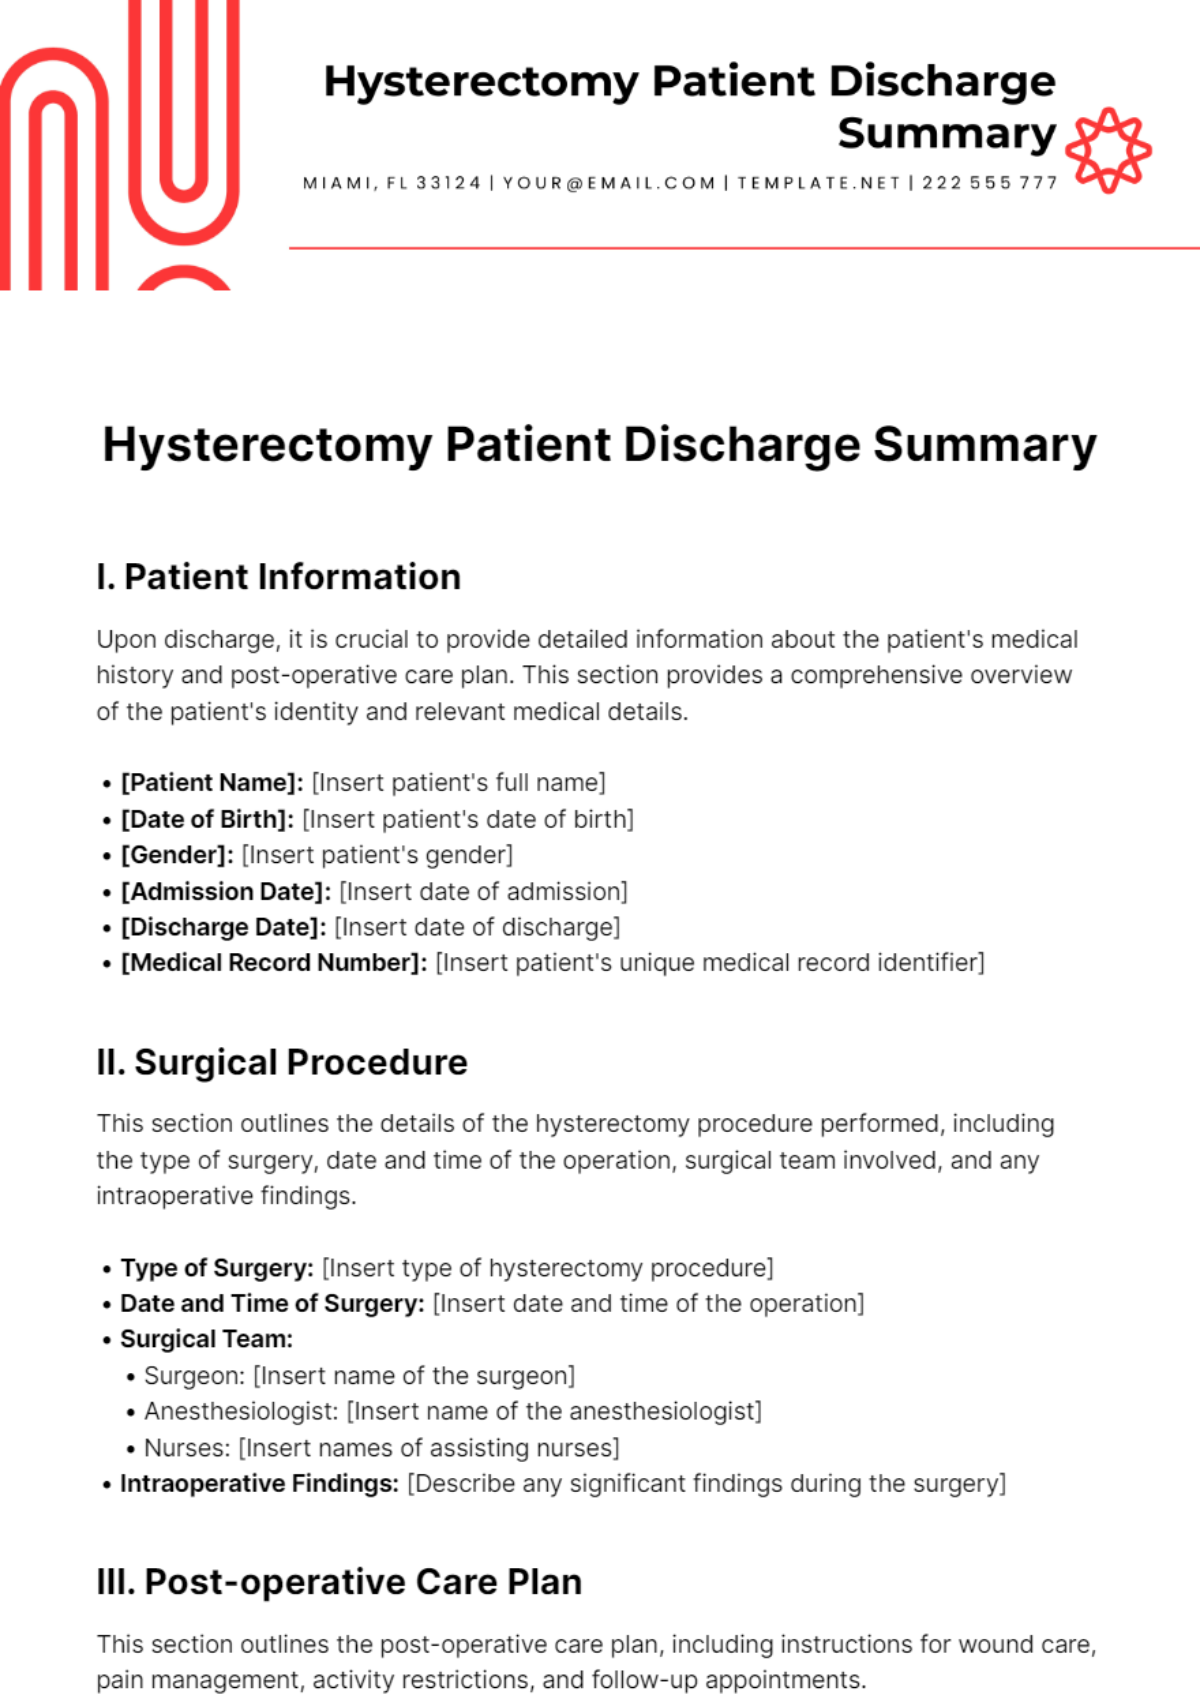 Free Hysterectomy Patient Discharge Summary Template